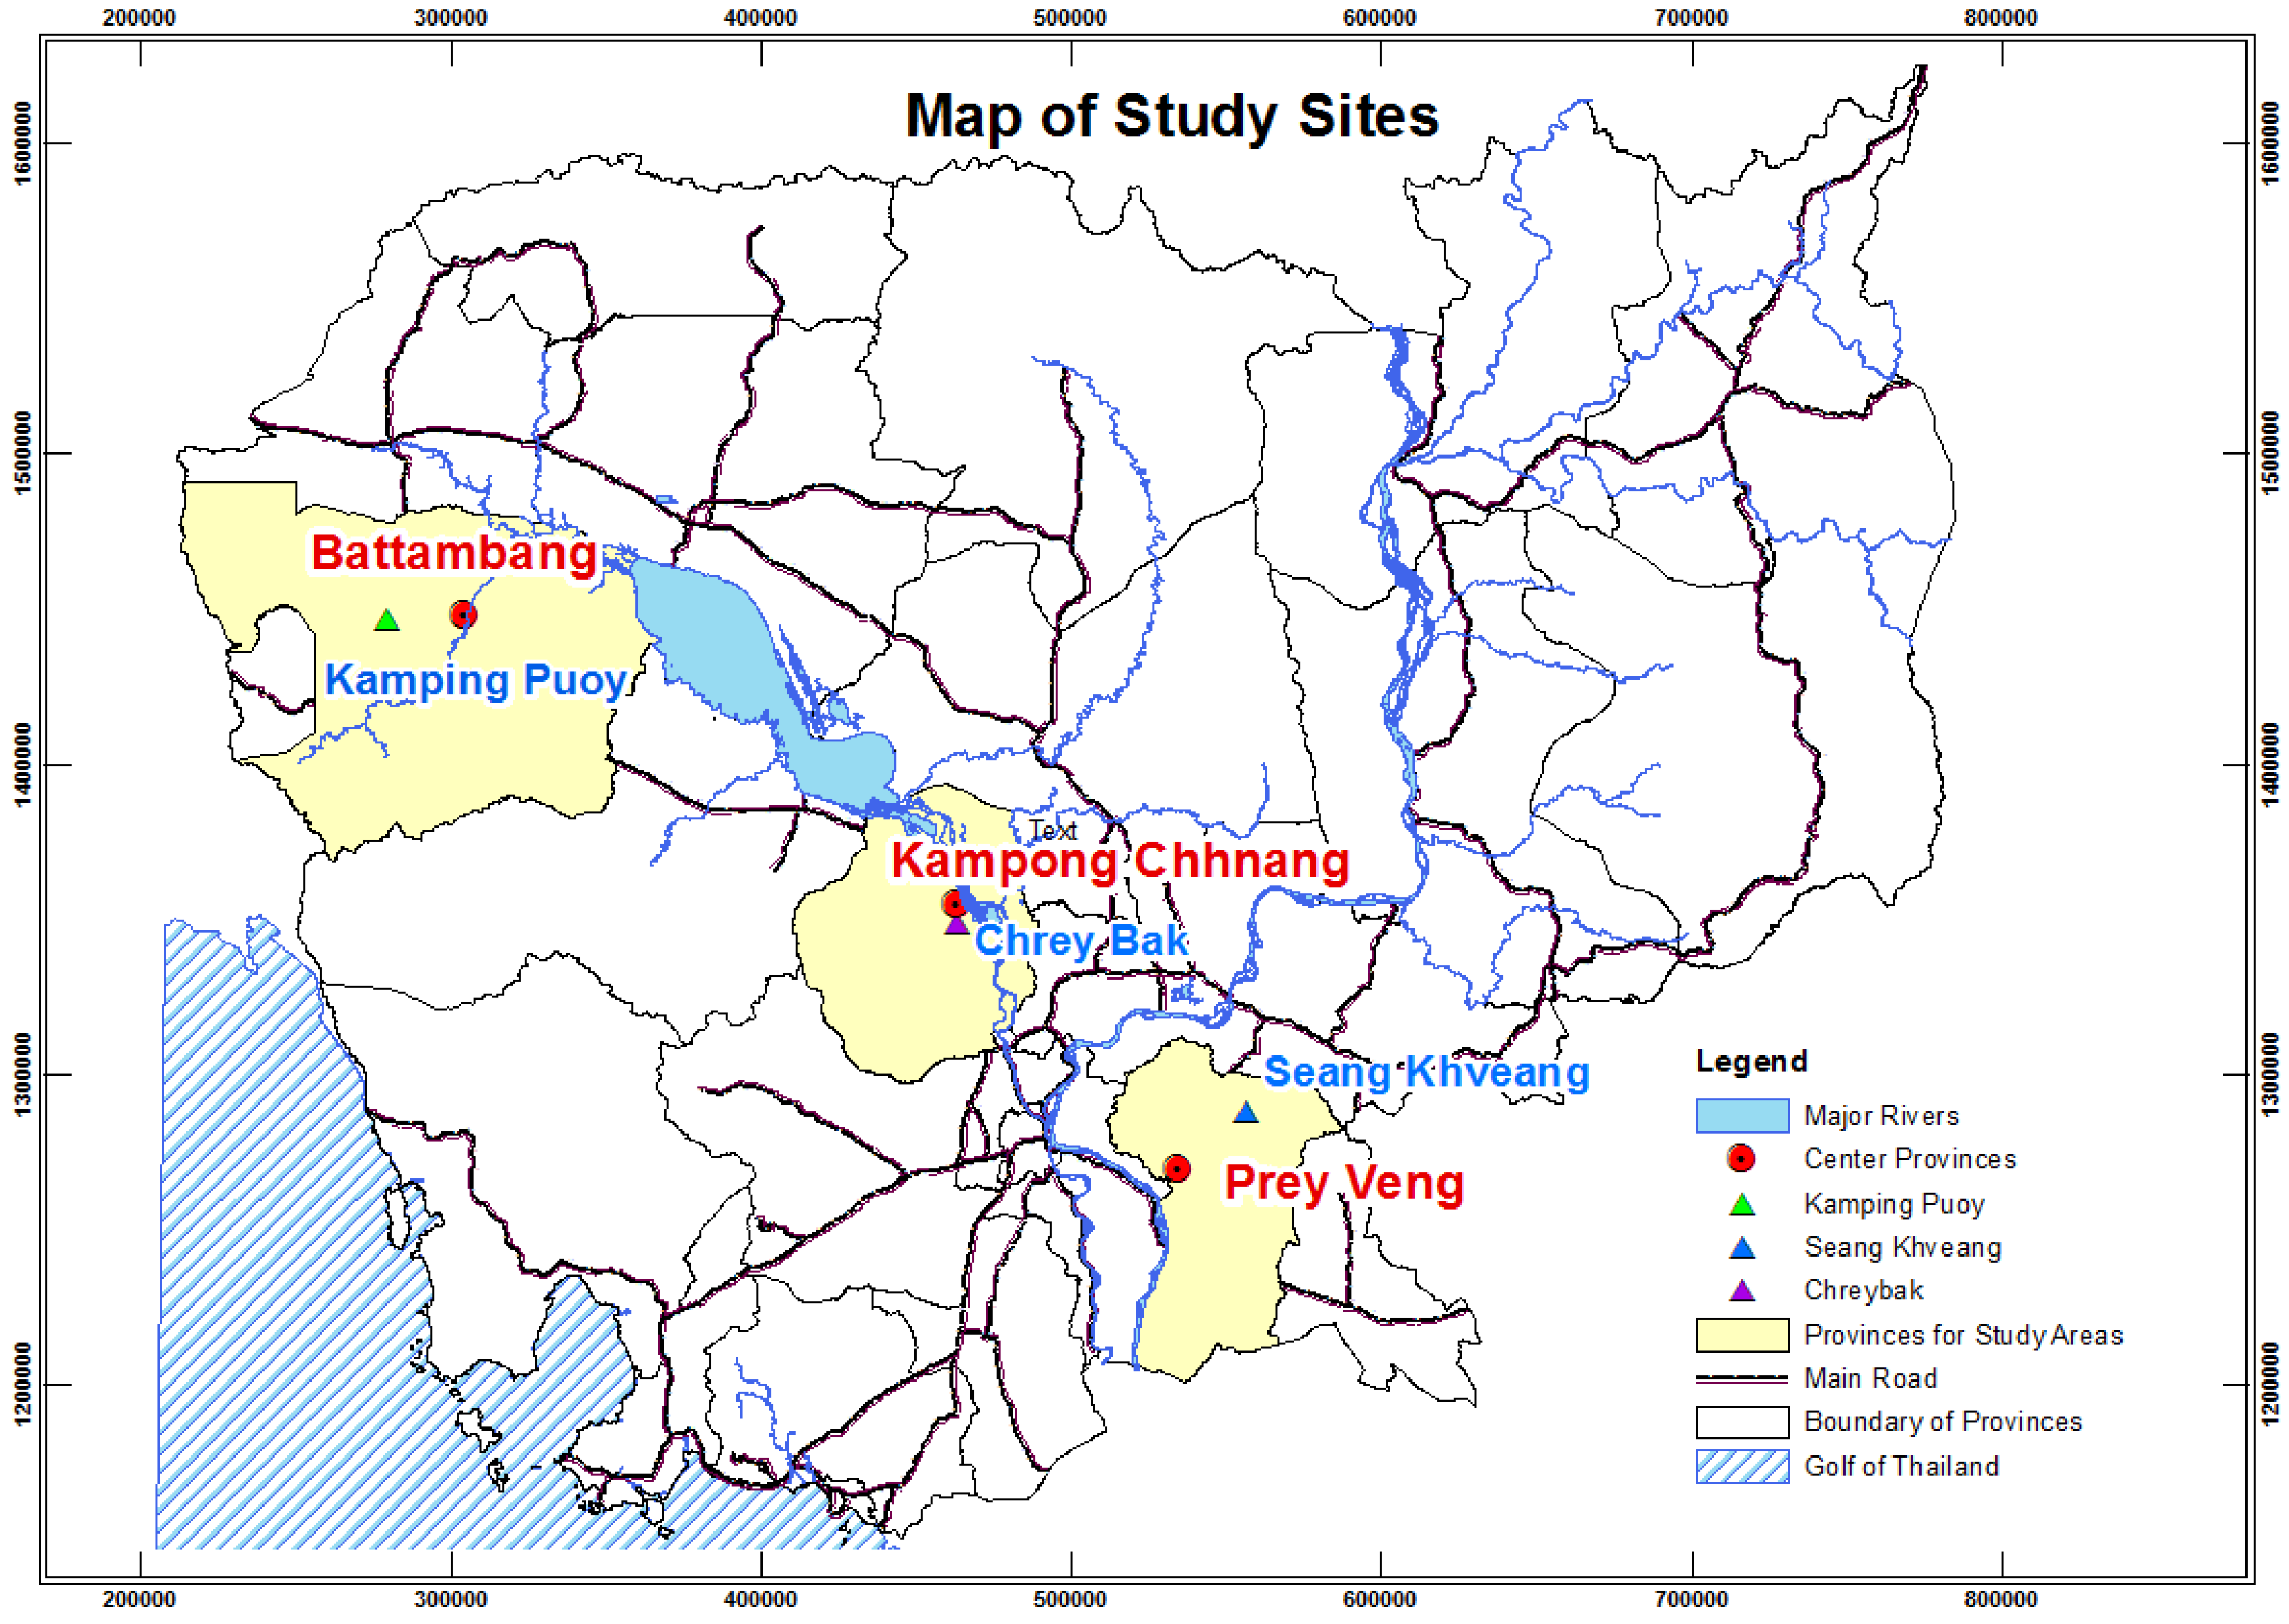 Resources | Free Full-Text | Water Governance in Cambodia: From Centralized  Water Governance to Farmer Water User Community | HTML